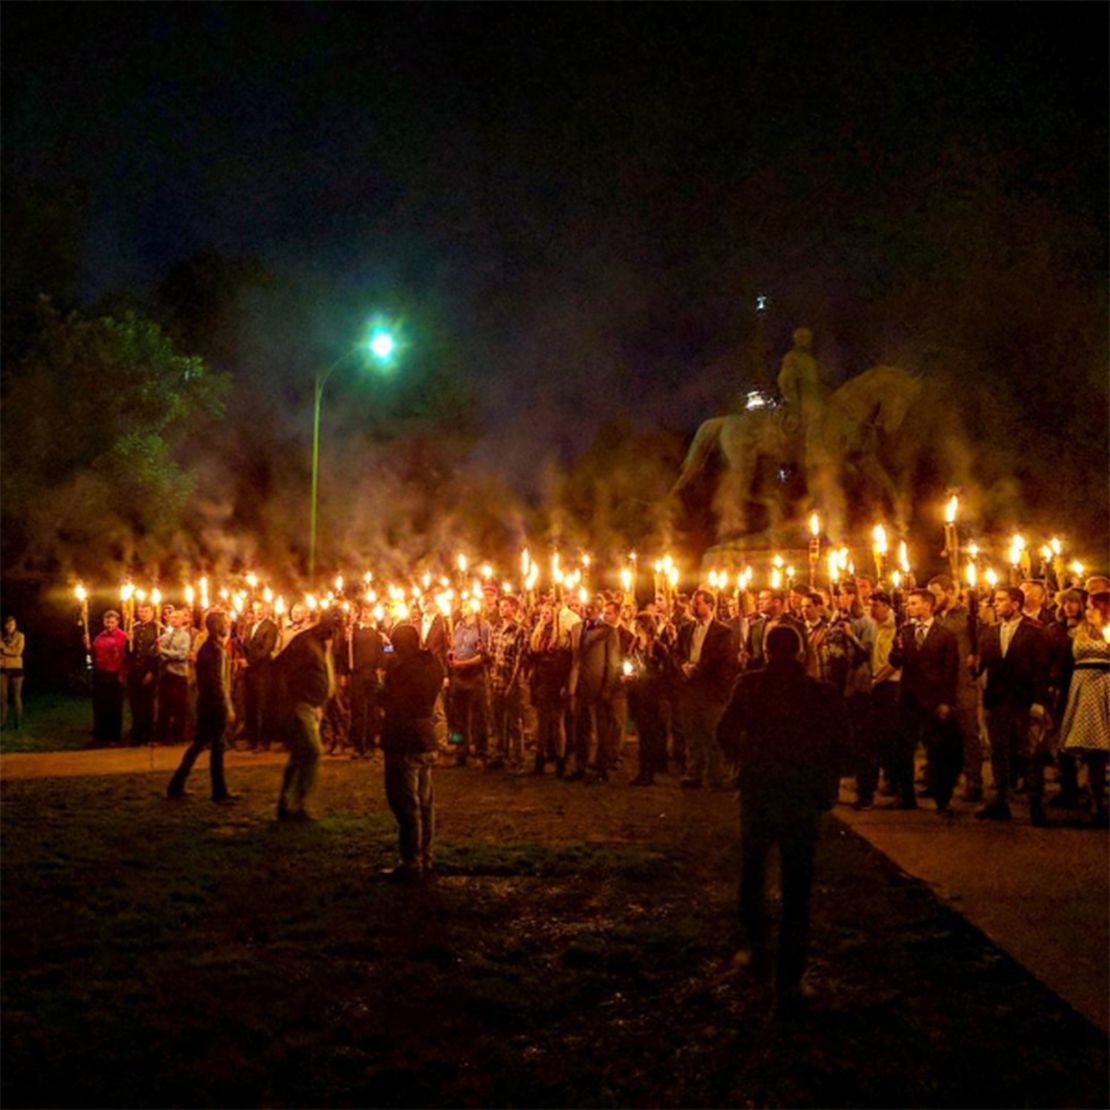 Torch-carrying demonstrators gather in Charlottesville on Saturday to protest the statue's removal.